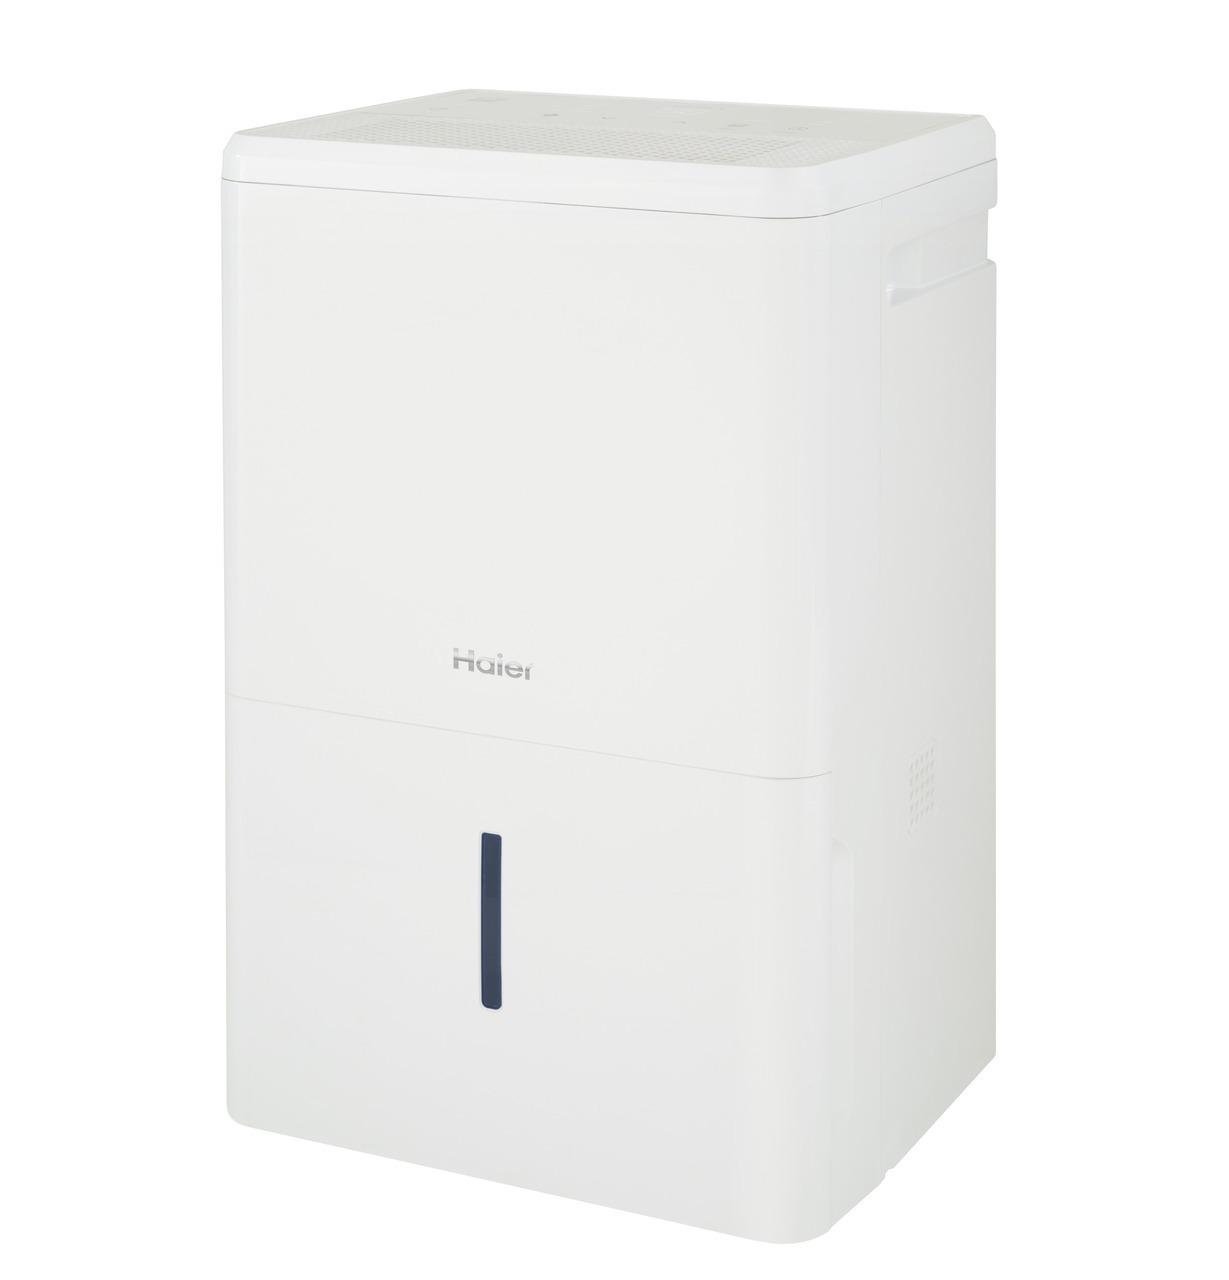 Haier QDHR50LZ Haier 50 Pint Energy Star® Portable Dehumidifier With Smart Dry For Wet Spaces